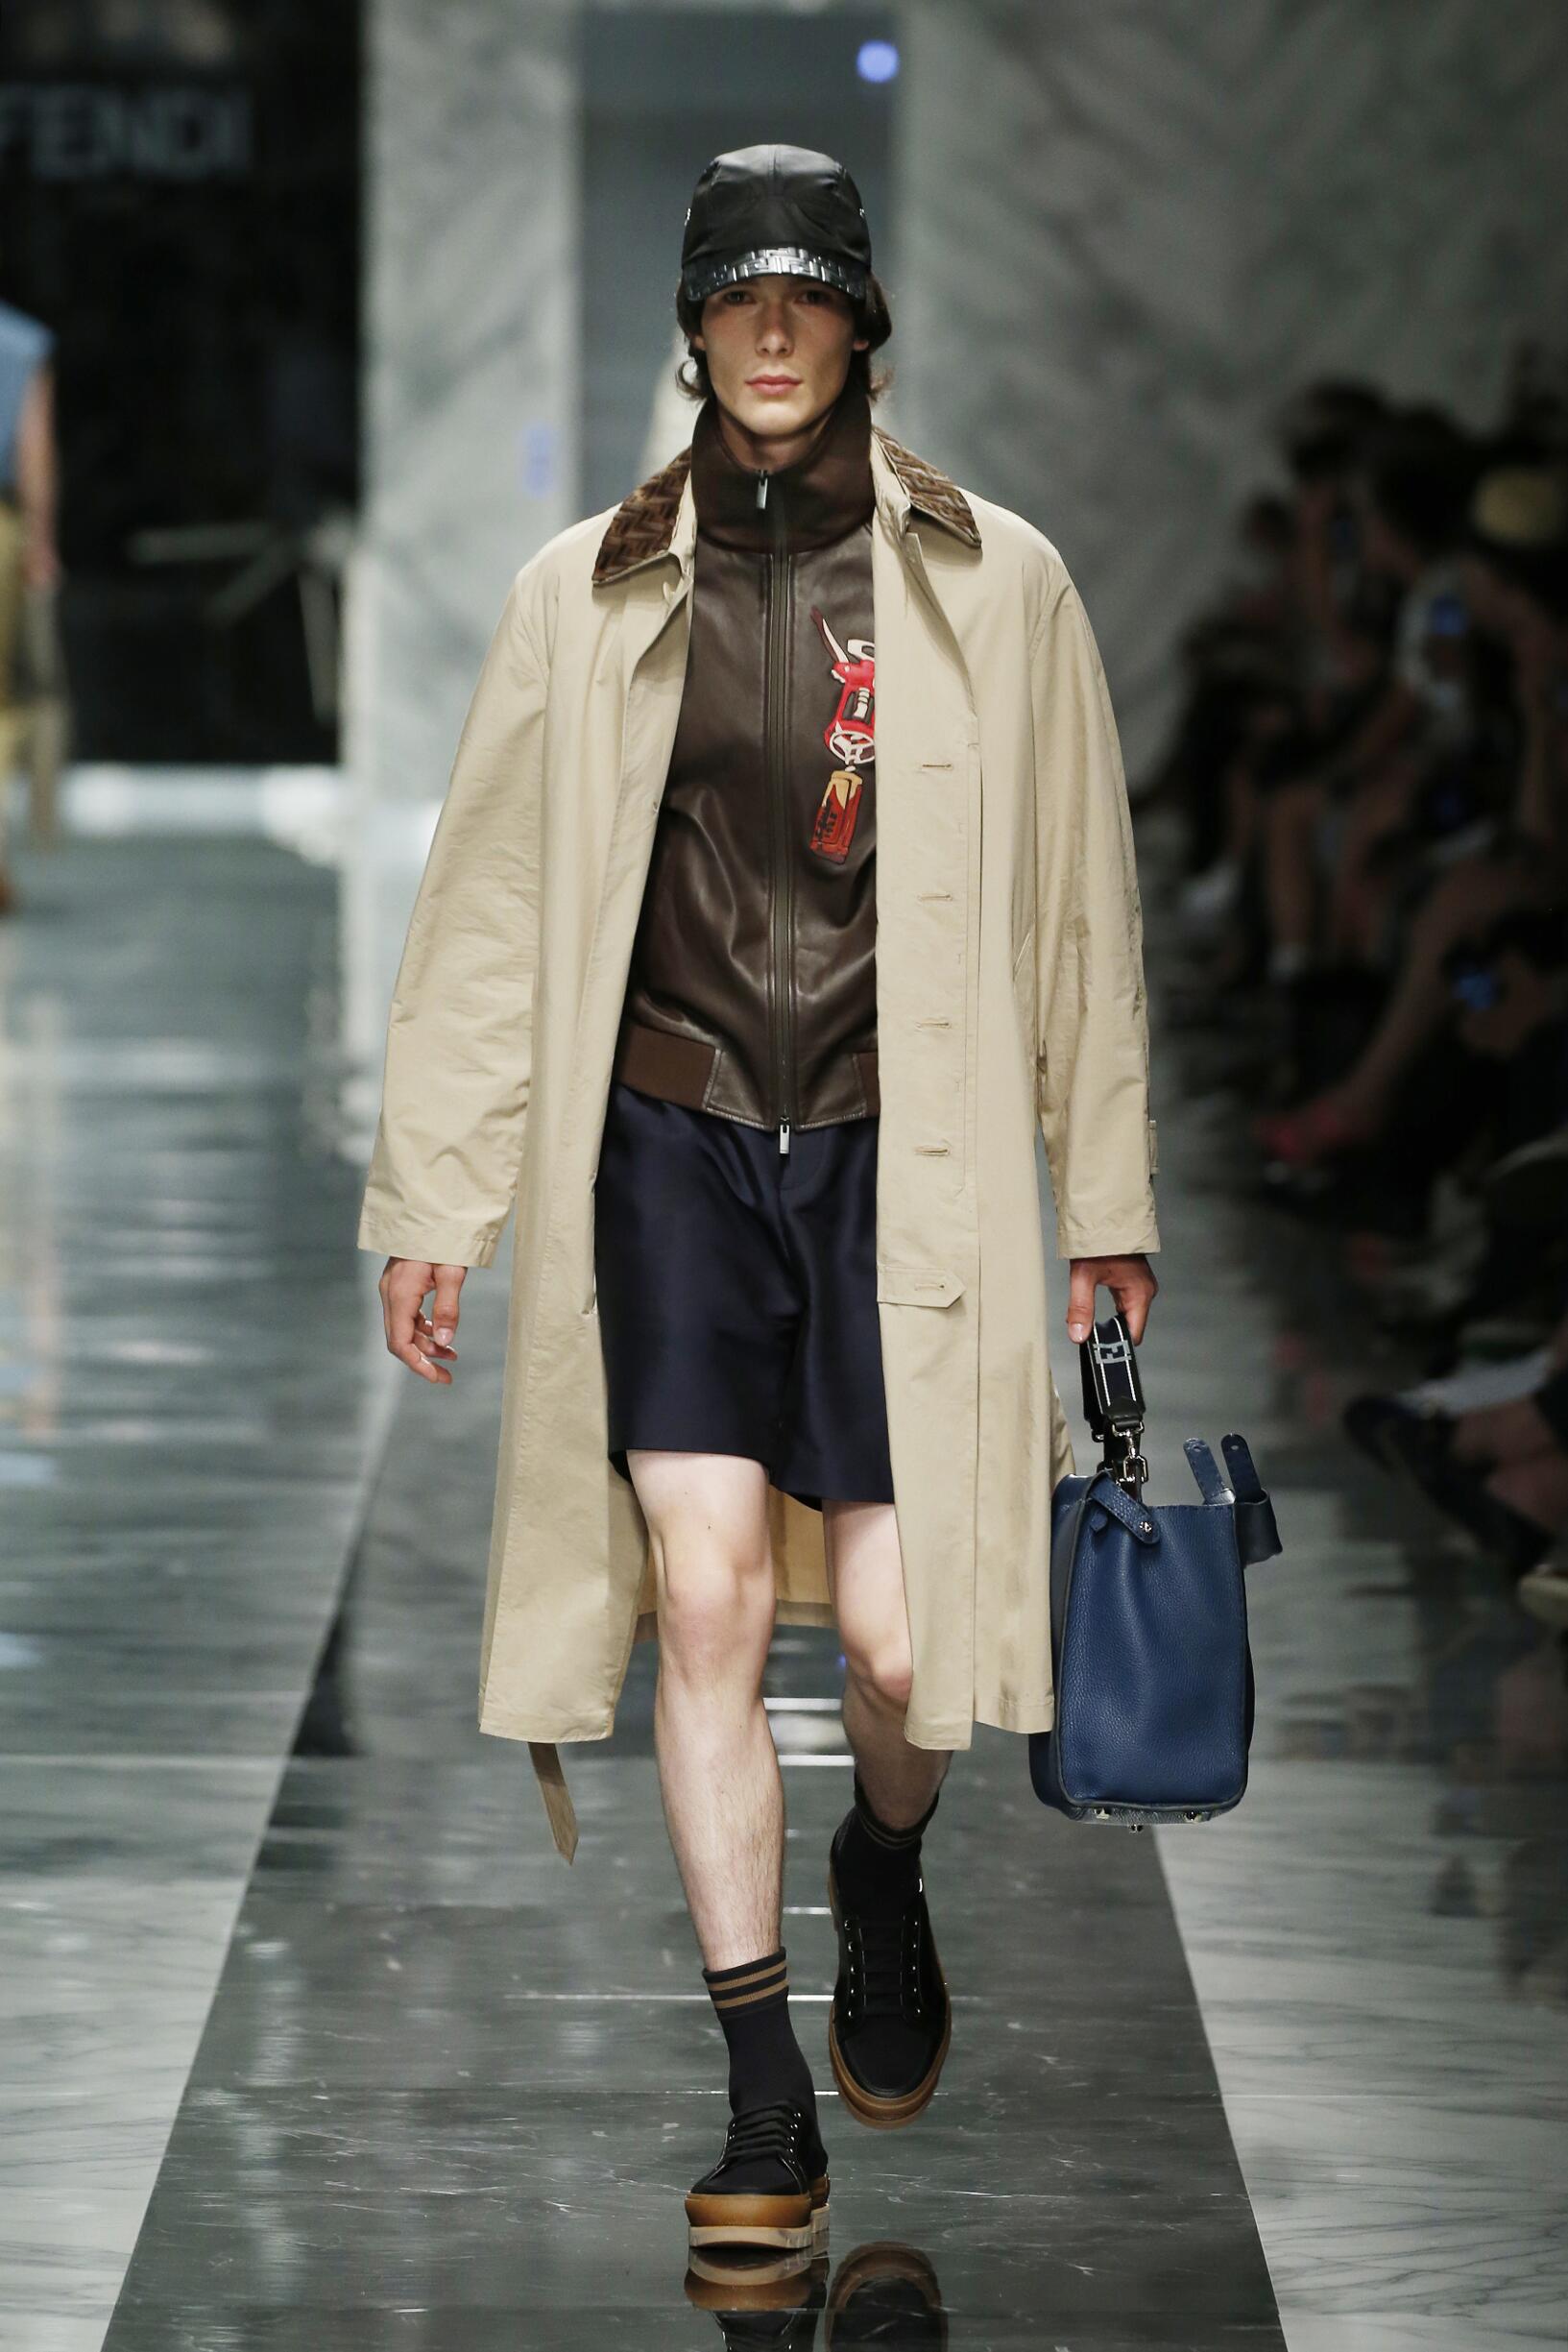 FENDI SPRING SUMMER 2018 MEN’S COLLECTION | The Skinny Beep